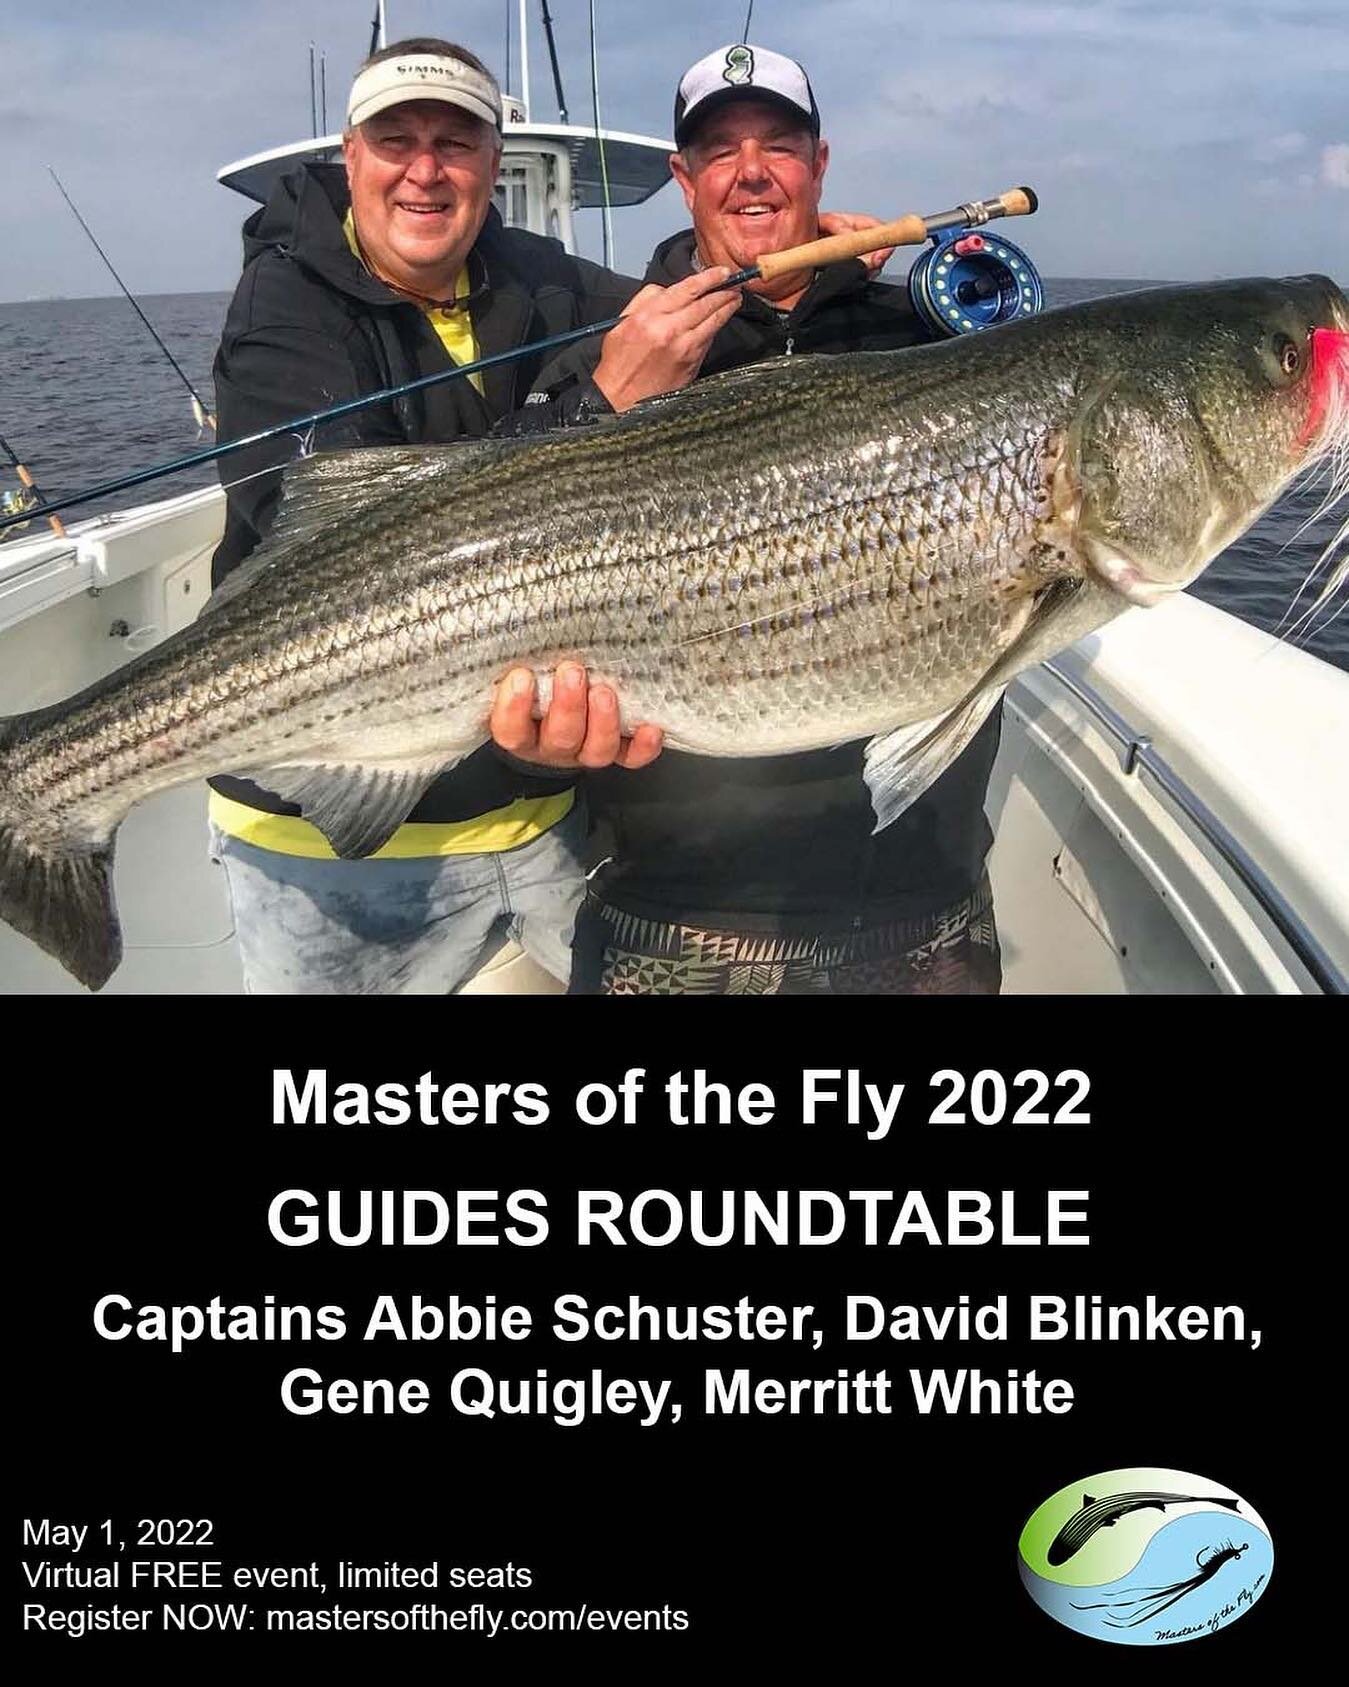 Are you all ready for the 2022 season??!!! 
.
Join us for our FINAL event of the season - a special evening with four guides covering New Jersey to Montauk to Massachusetts. Find out what they learned from last season, what they&rsquo;re expecting fr